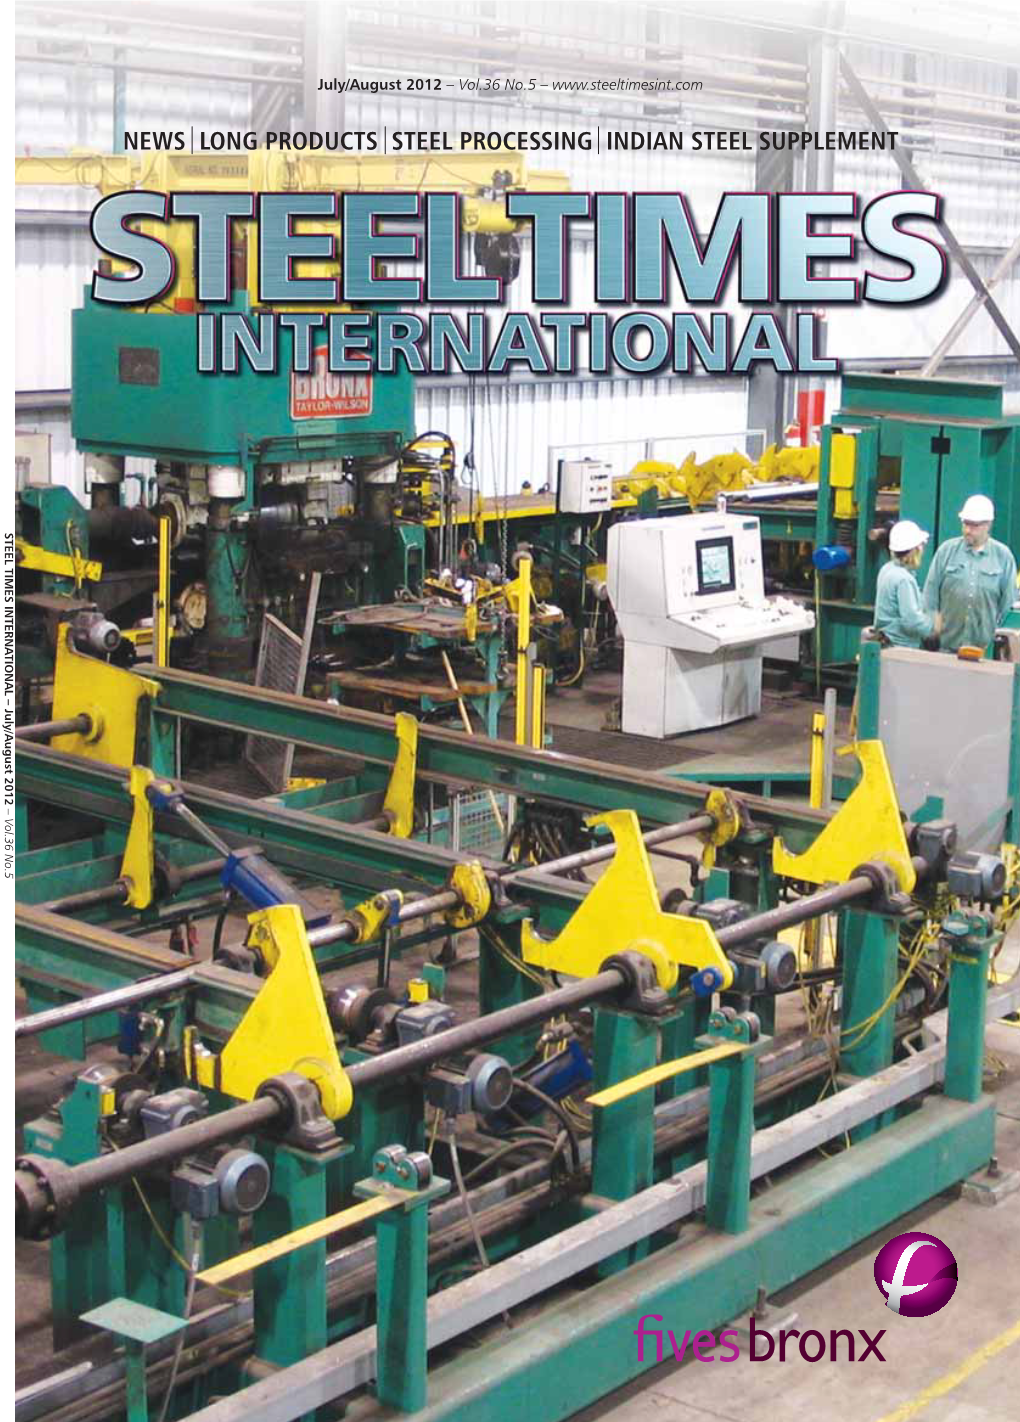 News Long Products Steel Processing Indian Steel Supplement Steel Supplement Indian Steel Processing Products Long News